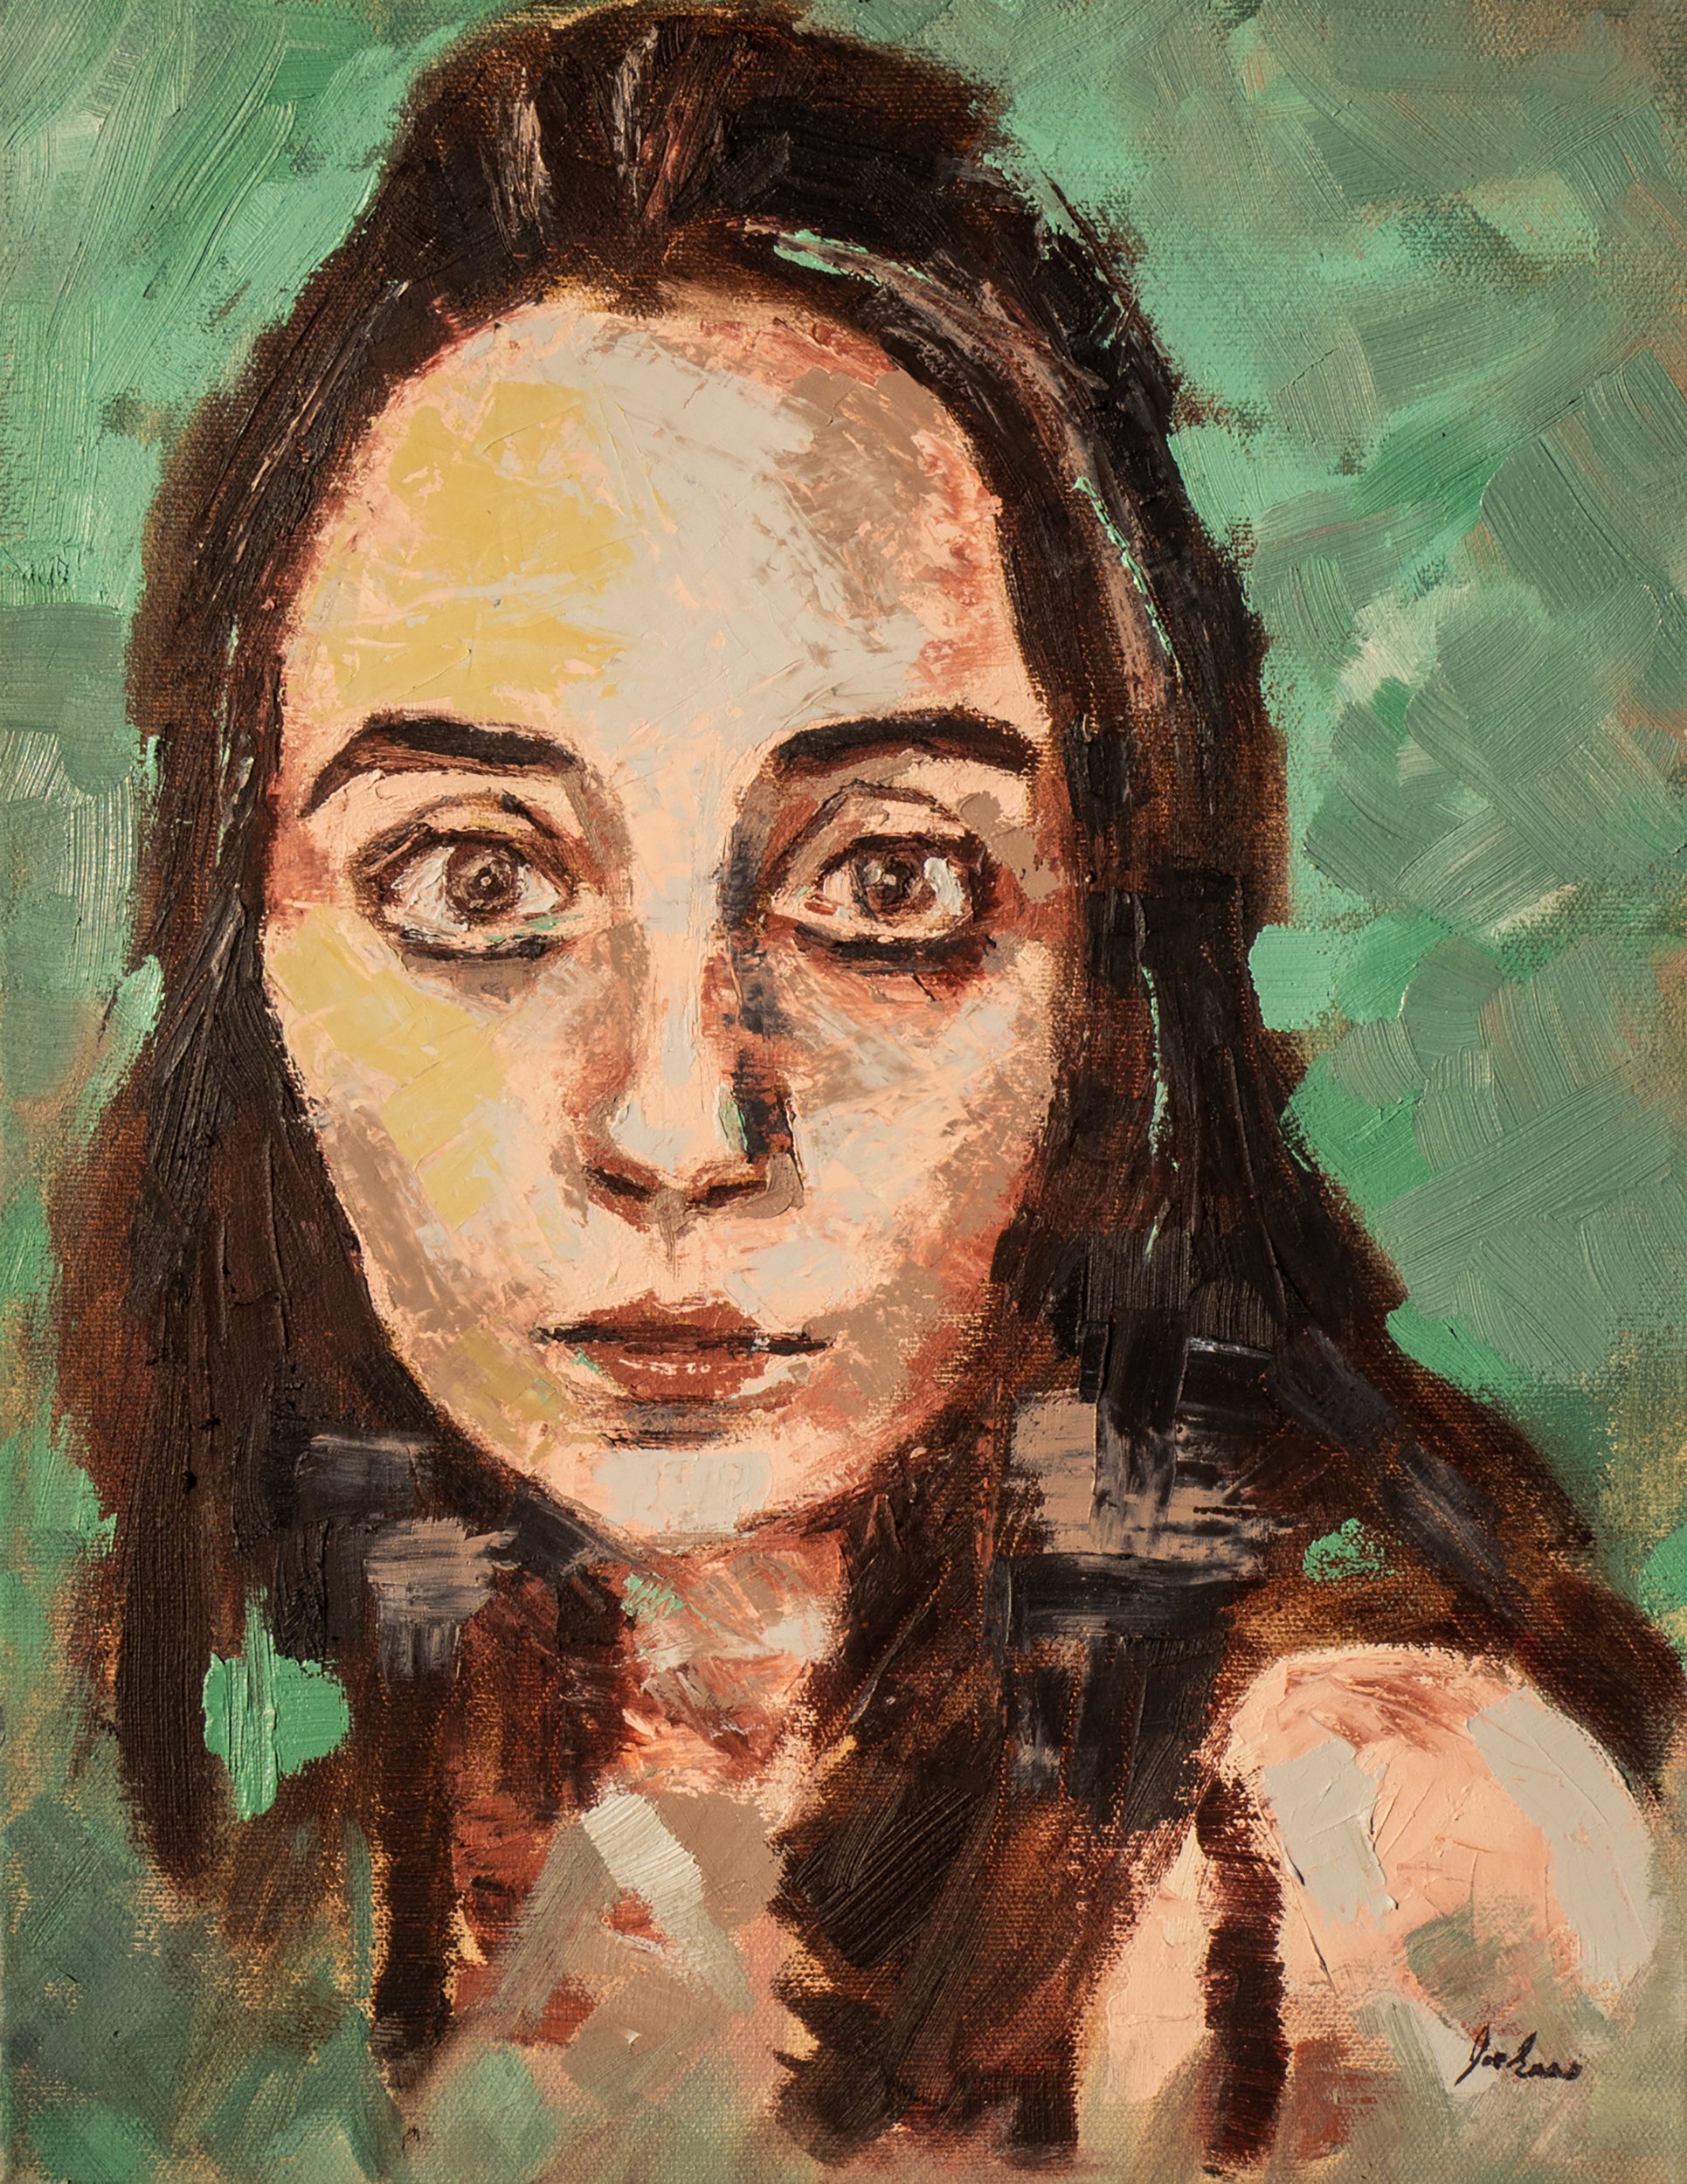 Emily S. Portrait - oil on canvas, 14 x 11 inches, SOLD